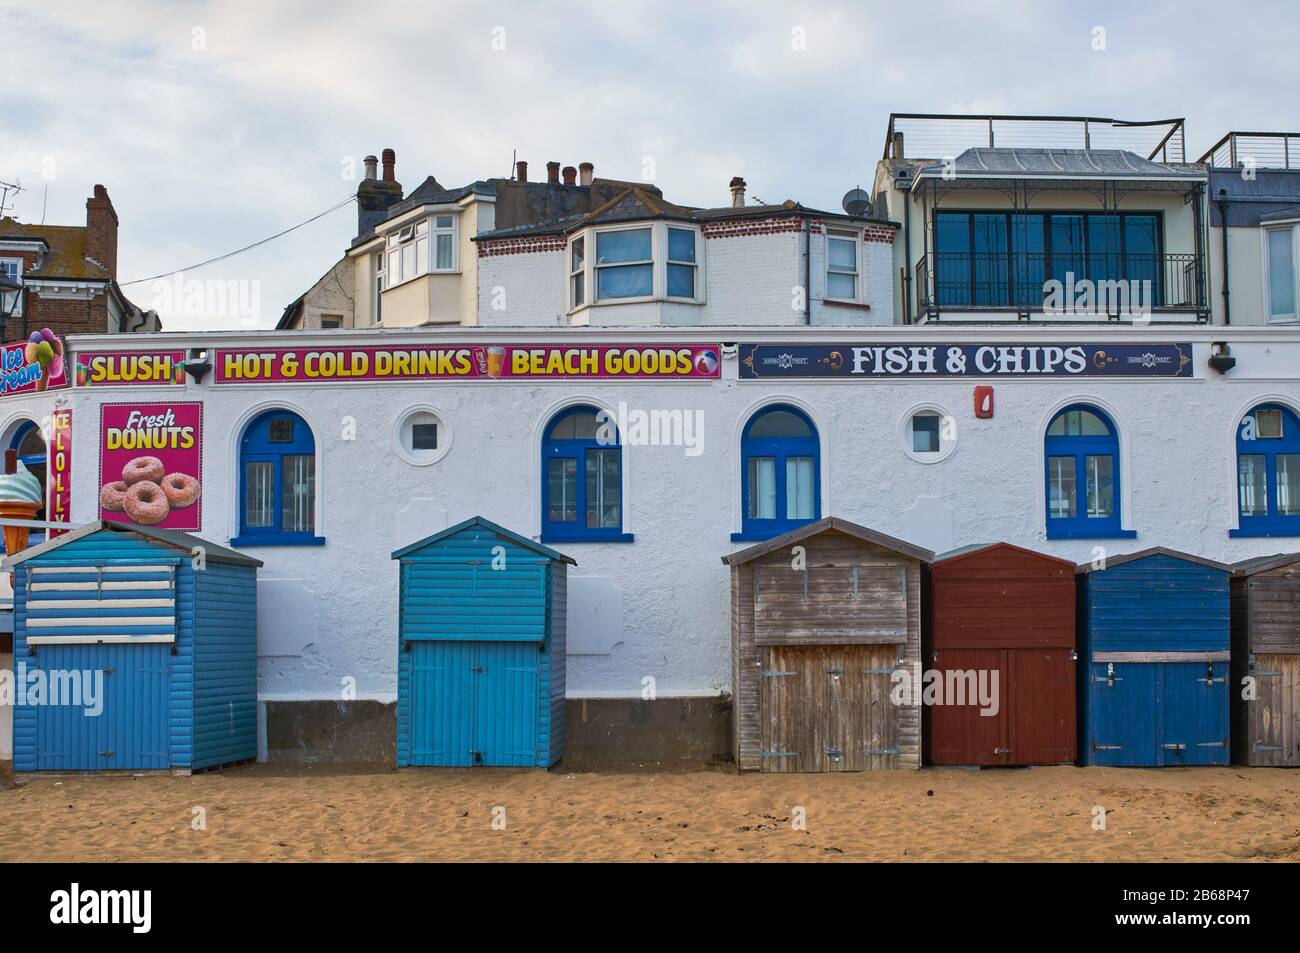 Cafe and beach huts on Broadstairs beach, East Kent, in the South East of England Stock Photo